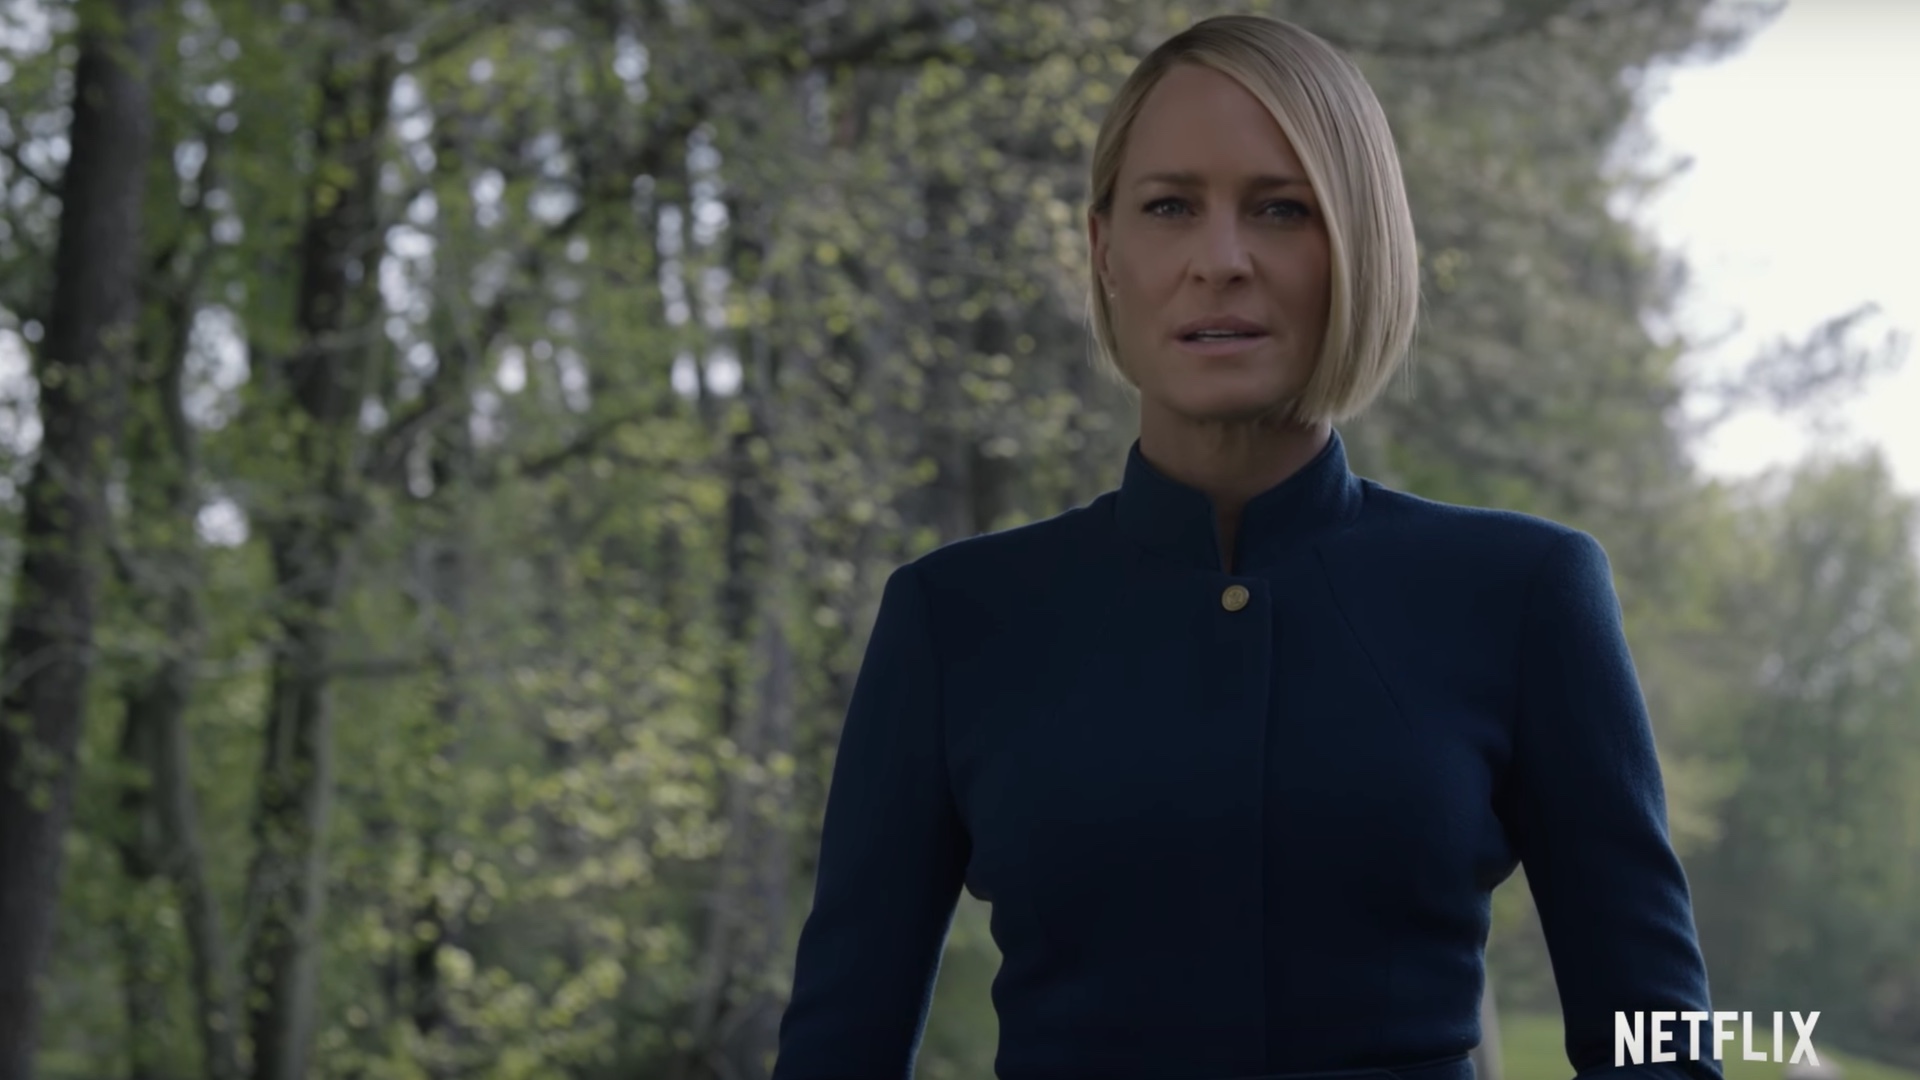 The Fate Of Frank Underwood Revealed In New Teaser Trailer For